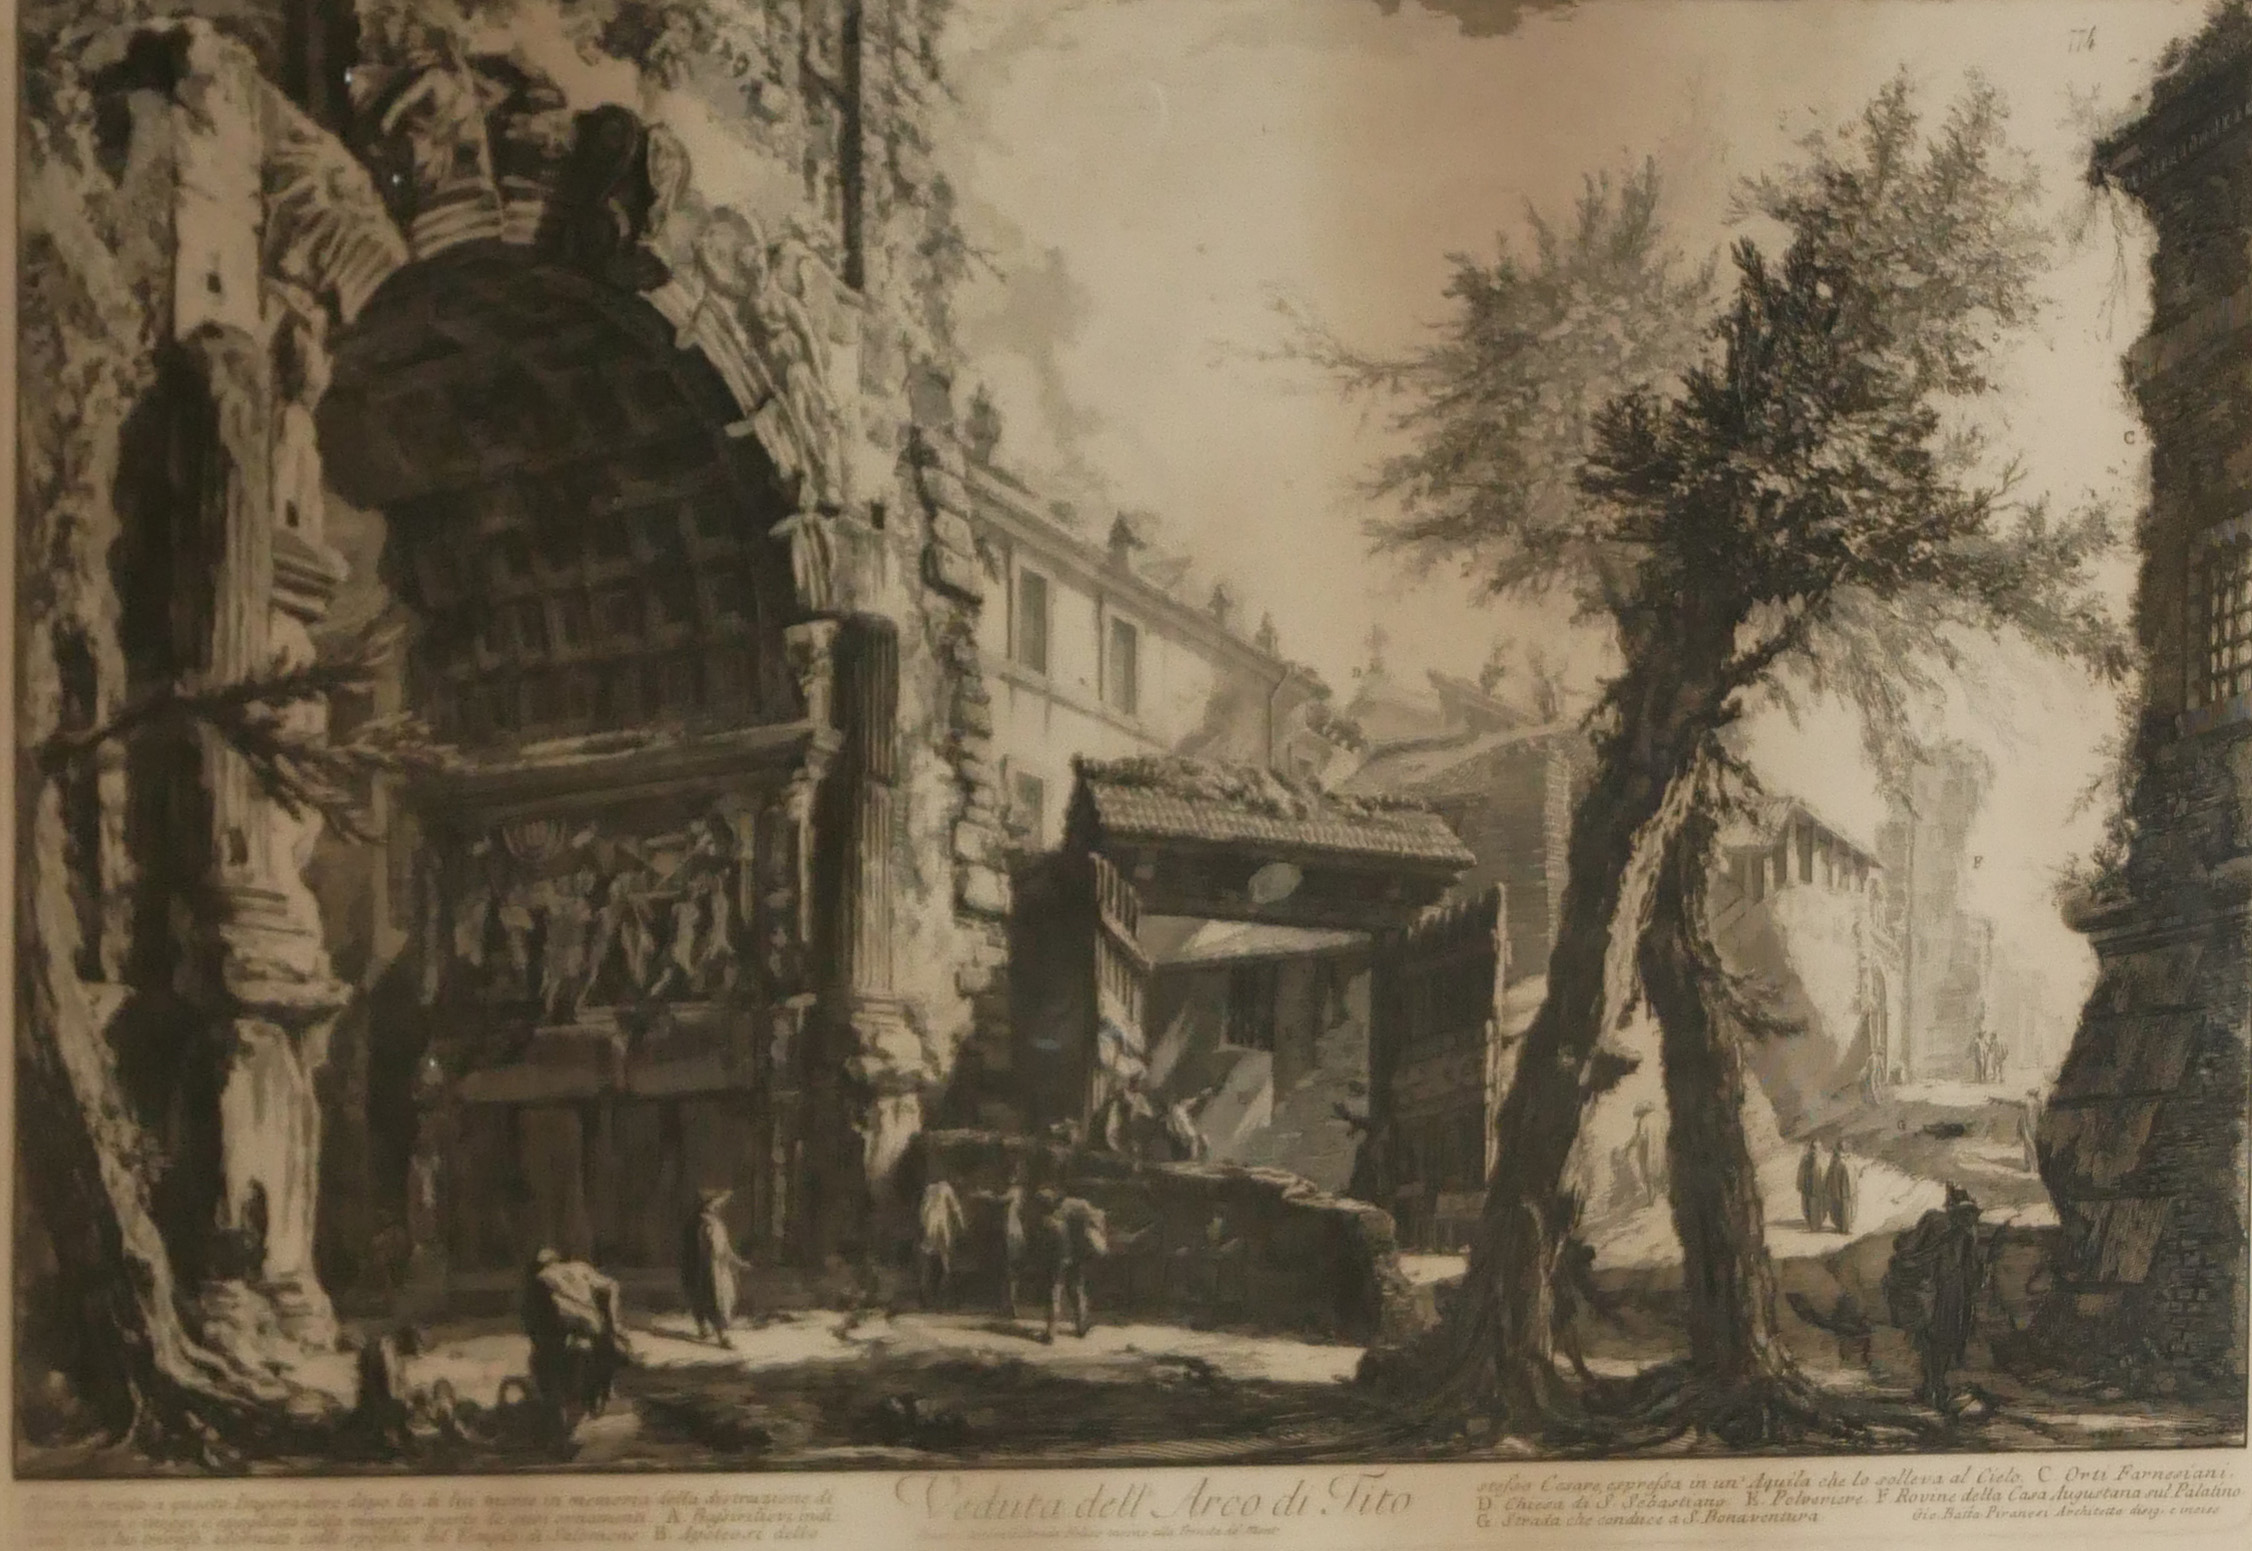 AFTER GIOVANNI BATTISTA PIRANESI, 1720 - 1788, AN ITALIAN BLACK AND WHITE LANDSCAPE ENGRAVING Titled